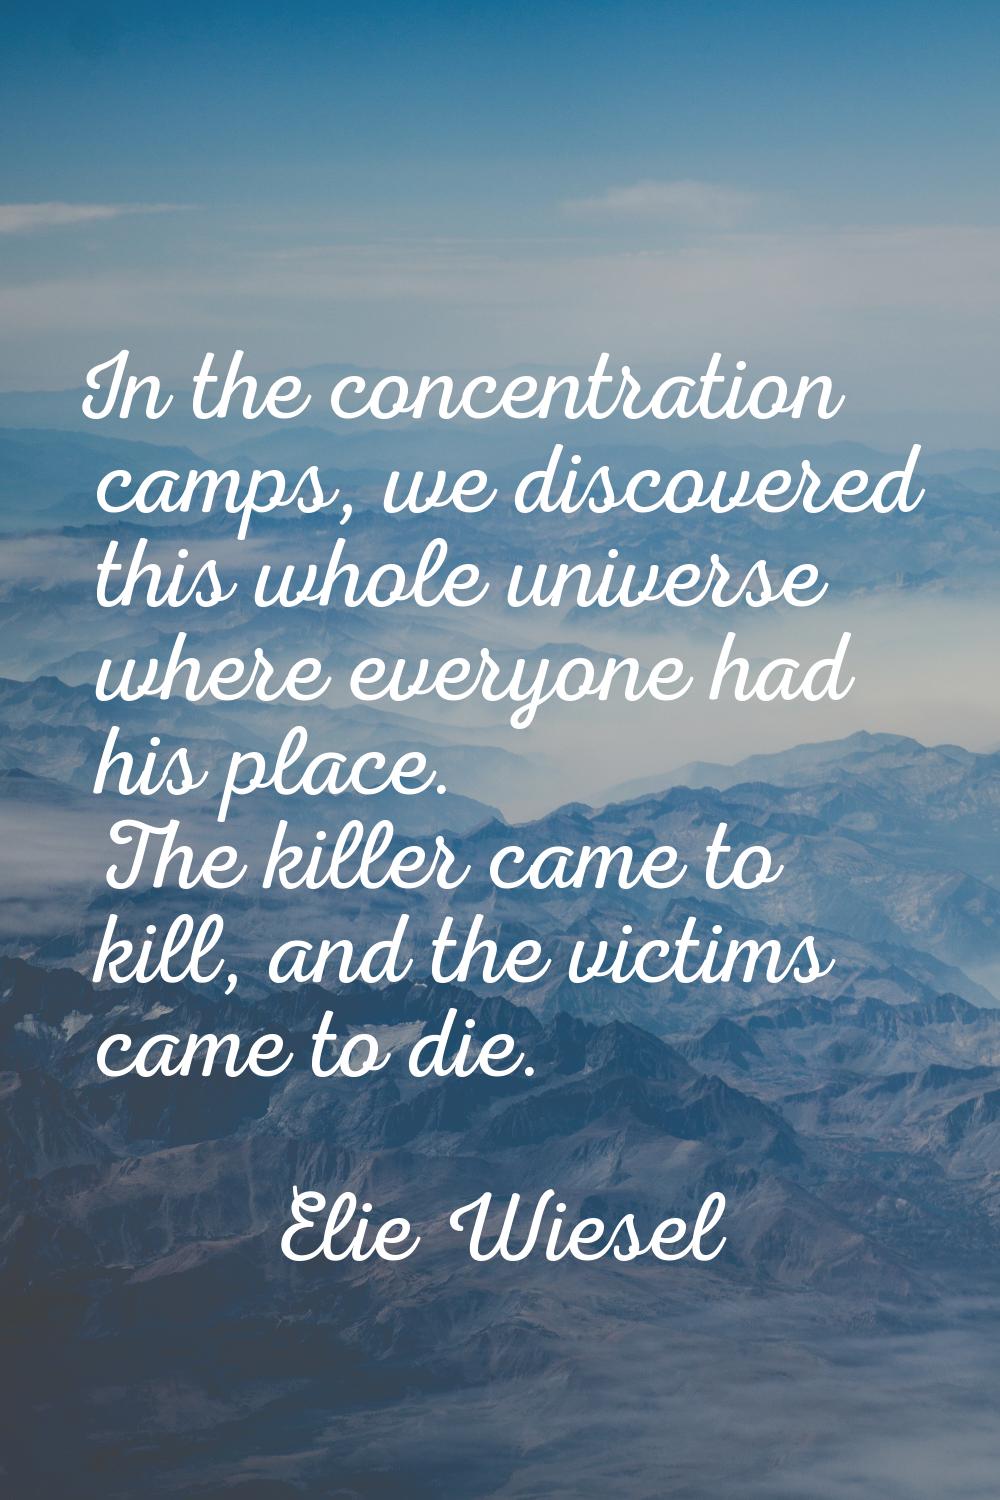 In the concentration camps, we discovered this whole universe where everyone had his place. The kil